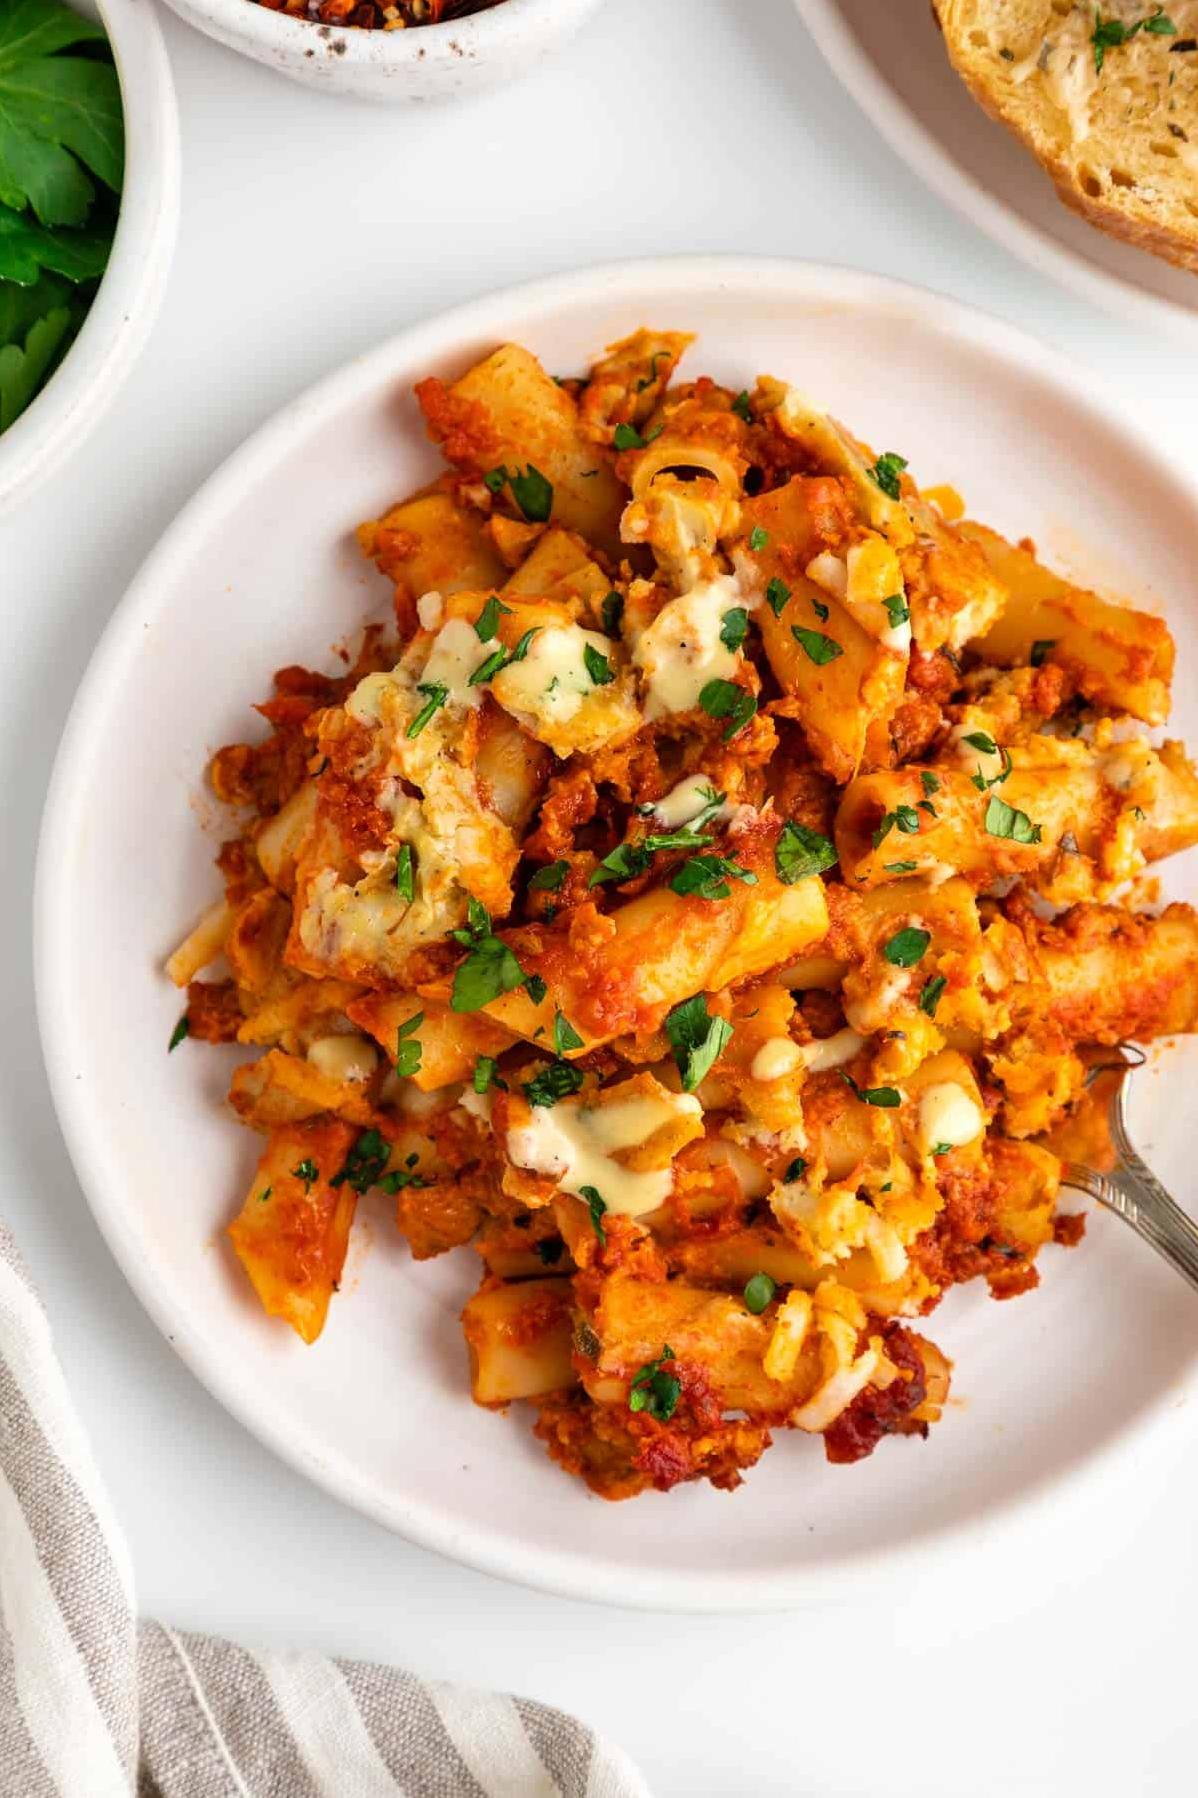  Get ready to sink your teeth into layers of deliciousness with this baked ziti recipe